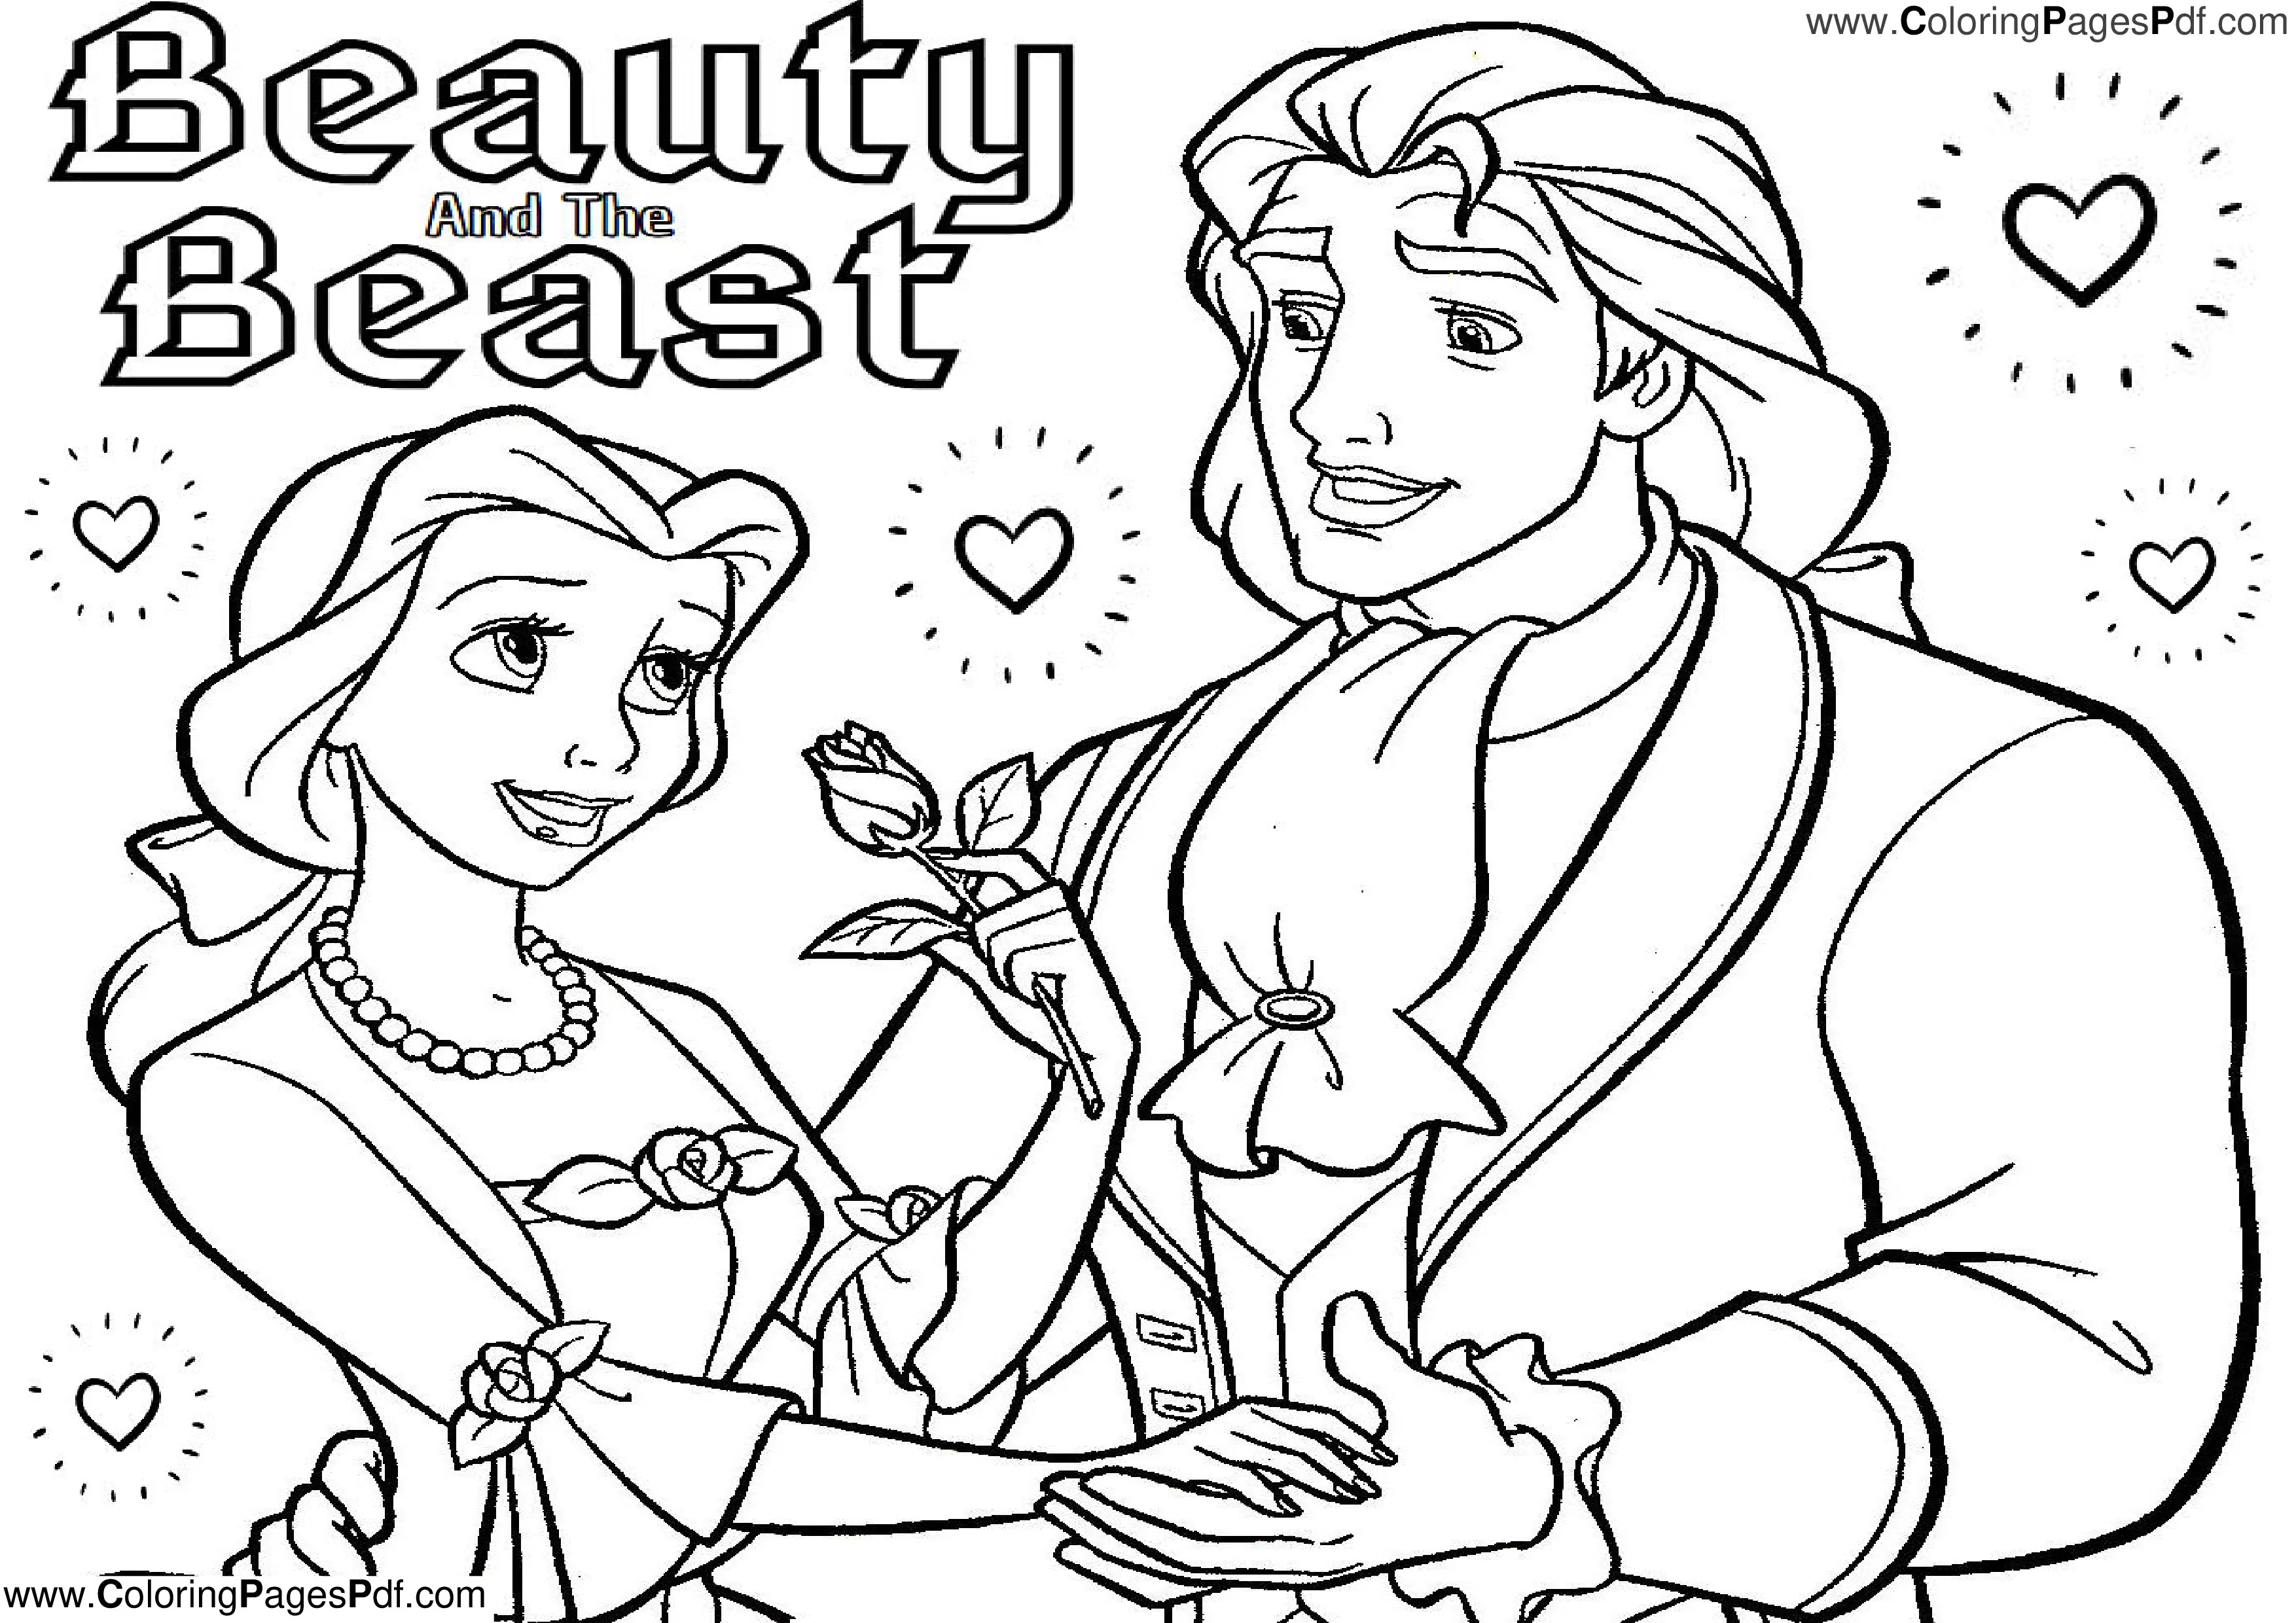 pretty color pages,beauty and the beast coloring book,beauty and the beast coloring pages free,belle coloring pages,disney princess coloring pages,princess coloring sheets,cinderella coloring pages,princess coloring pages online,free princess coloring sheets,cinderella coloring pages free,free printable princess coloring pages,free princess coloring pages,disney princess coloring,free disney princess coloring pages,princess coloring pages printable